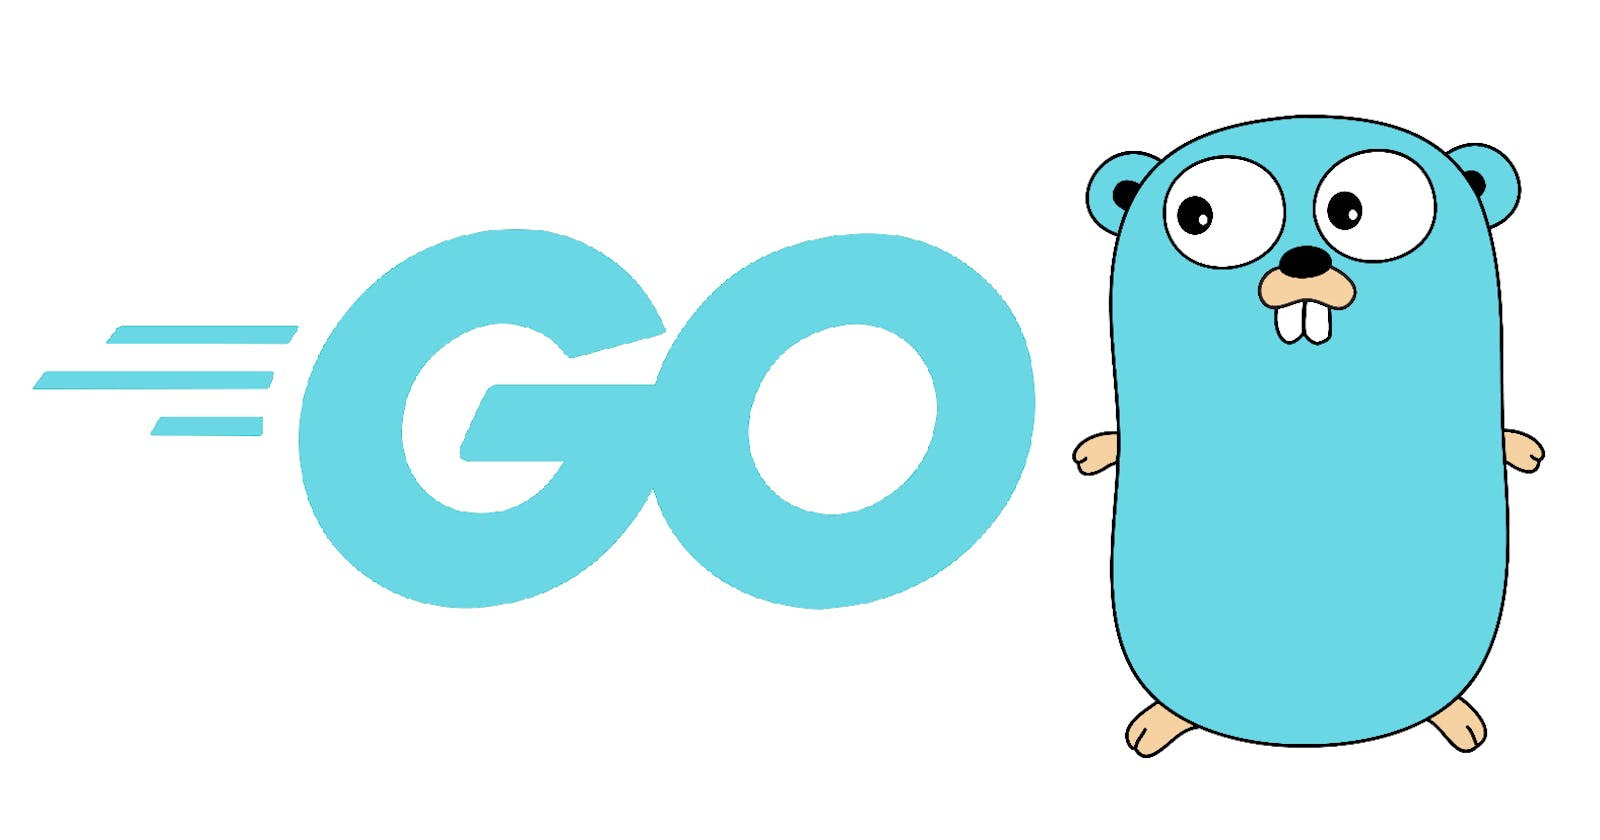 Golang: for beginners - Part 1: Getting started and variables